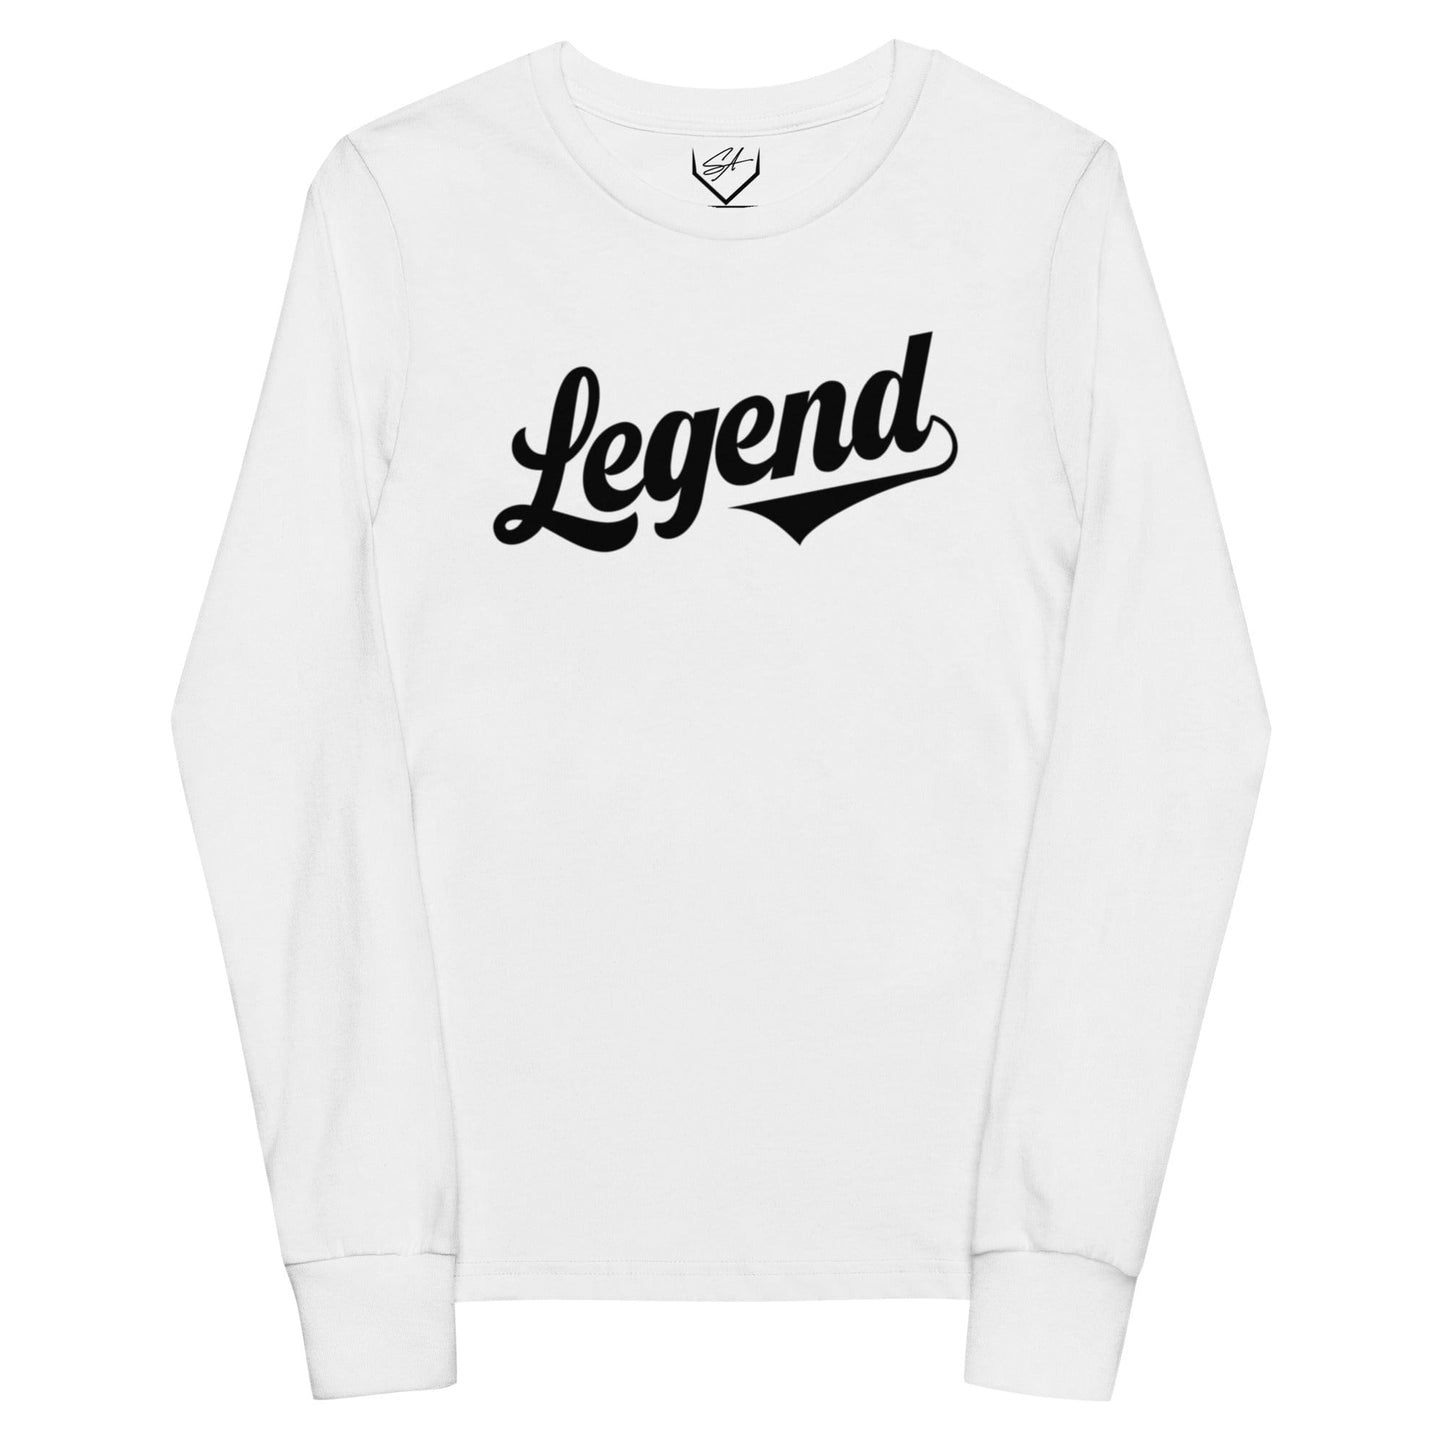 Legend - Youth Long Sleeve